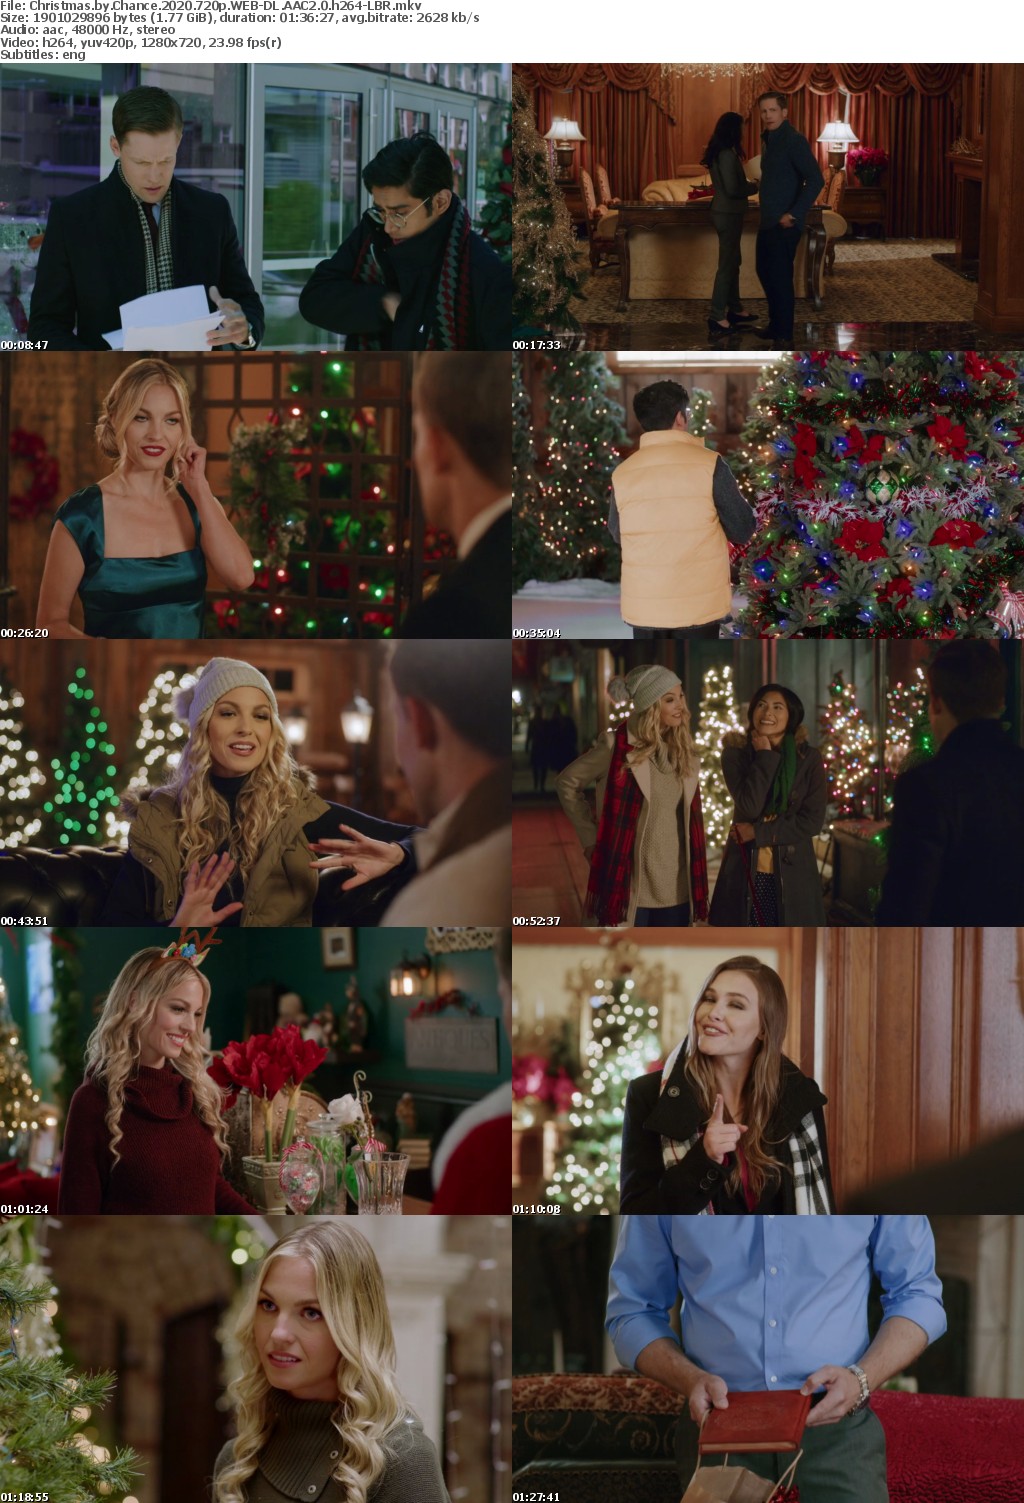 Christmas by Chance 2020 720p WEB-DL AAC2 0 h264-LBR